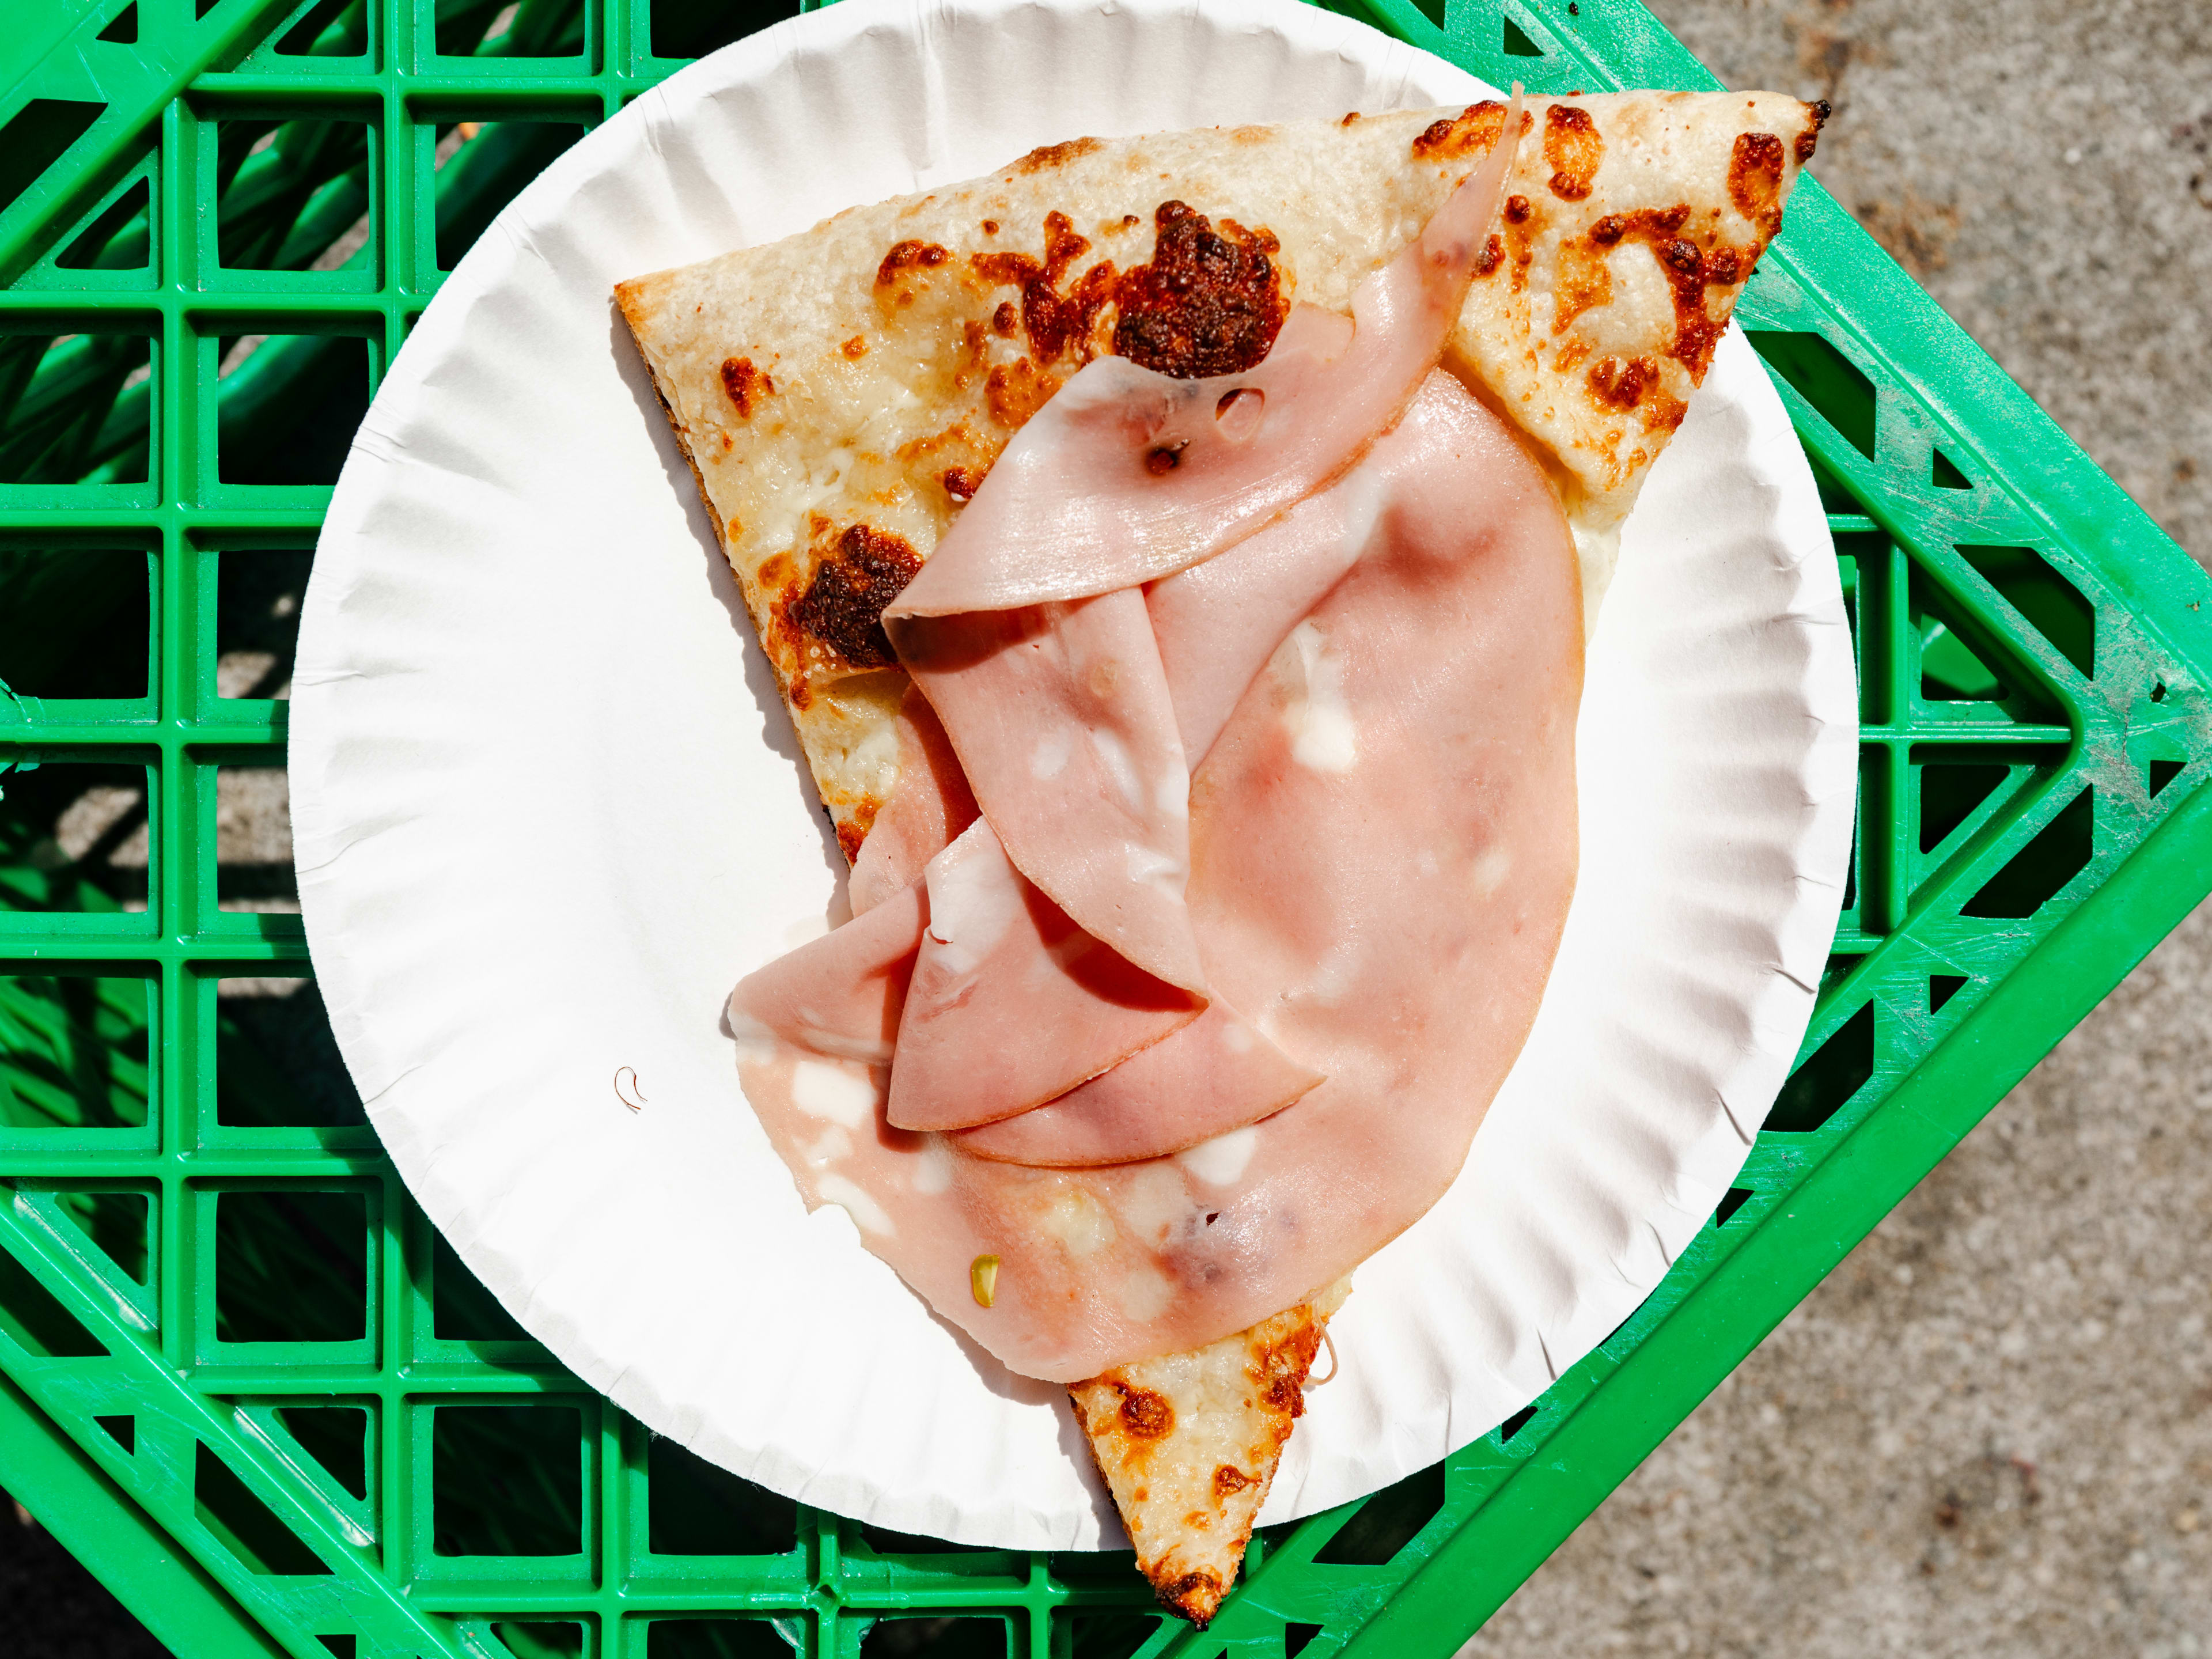 A slice of mortadella pizza on a paper plate on top of a green milk crate.